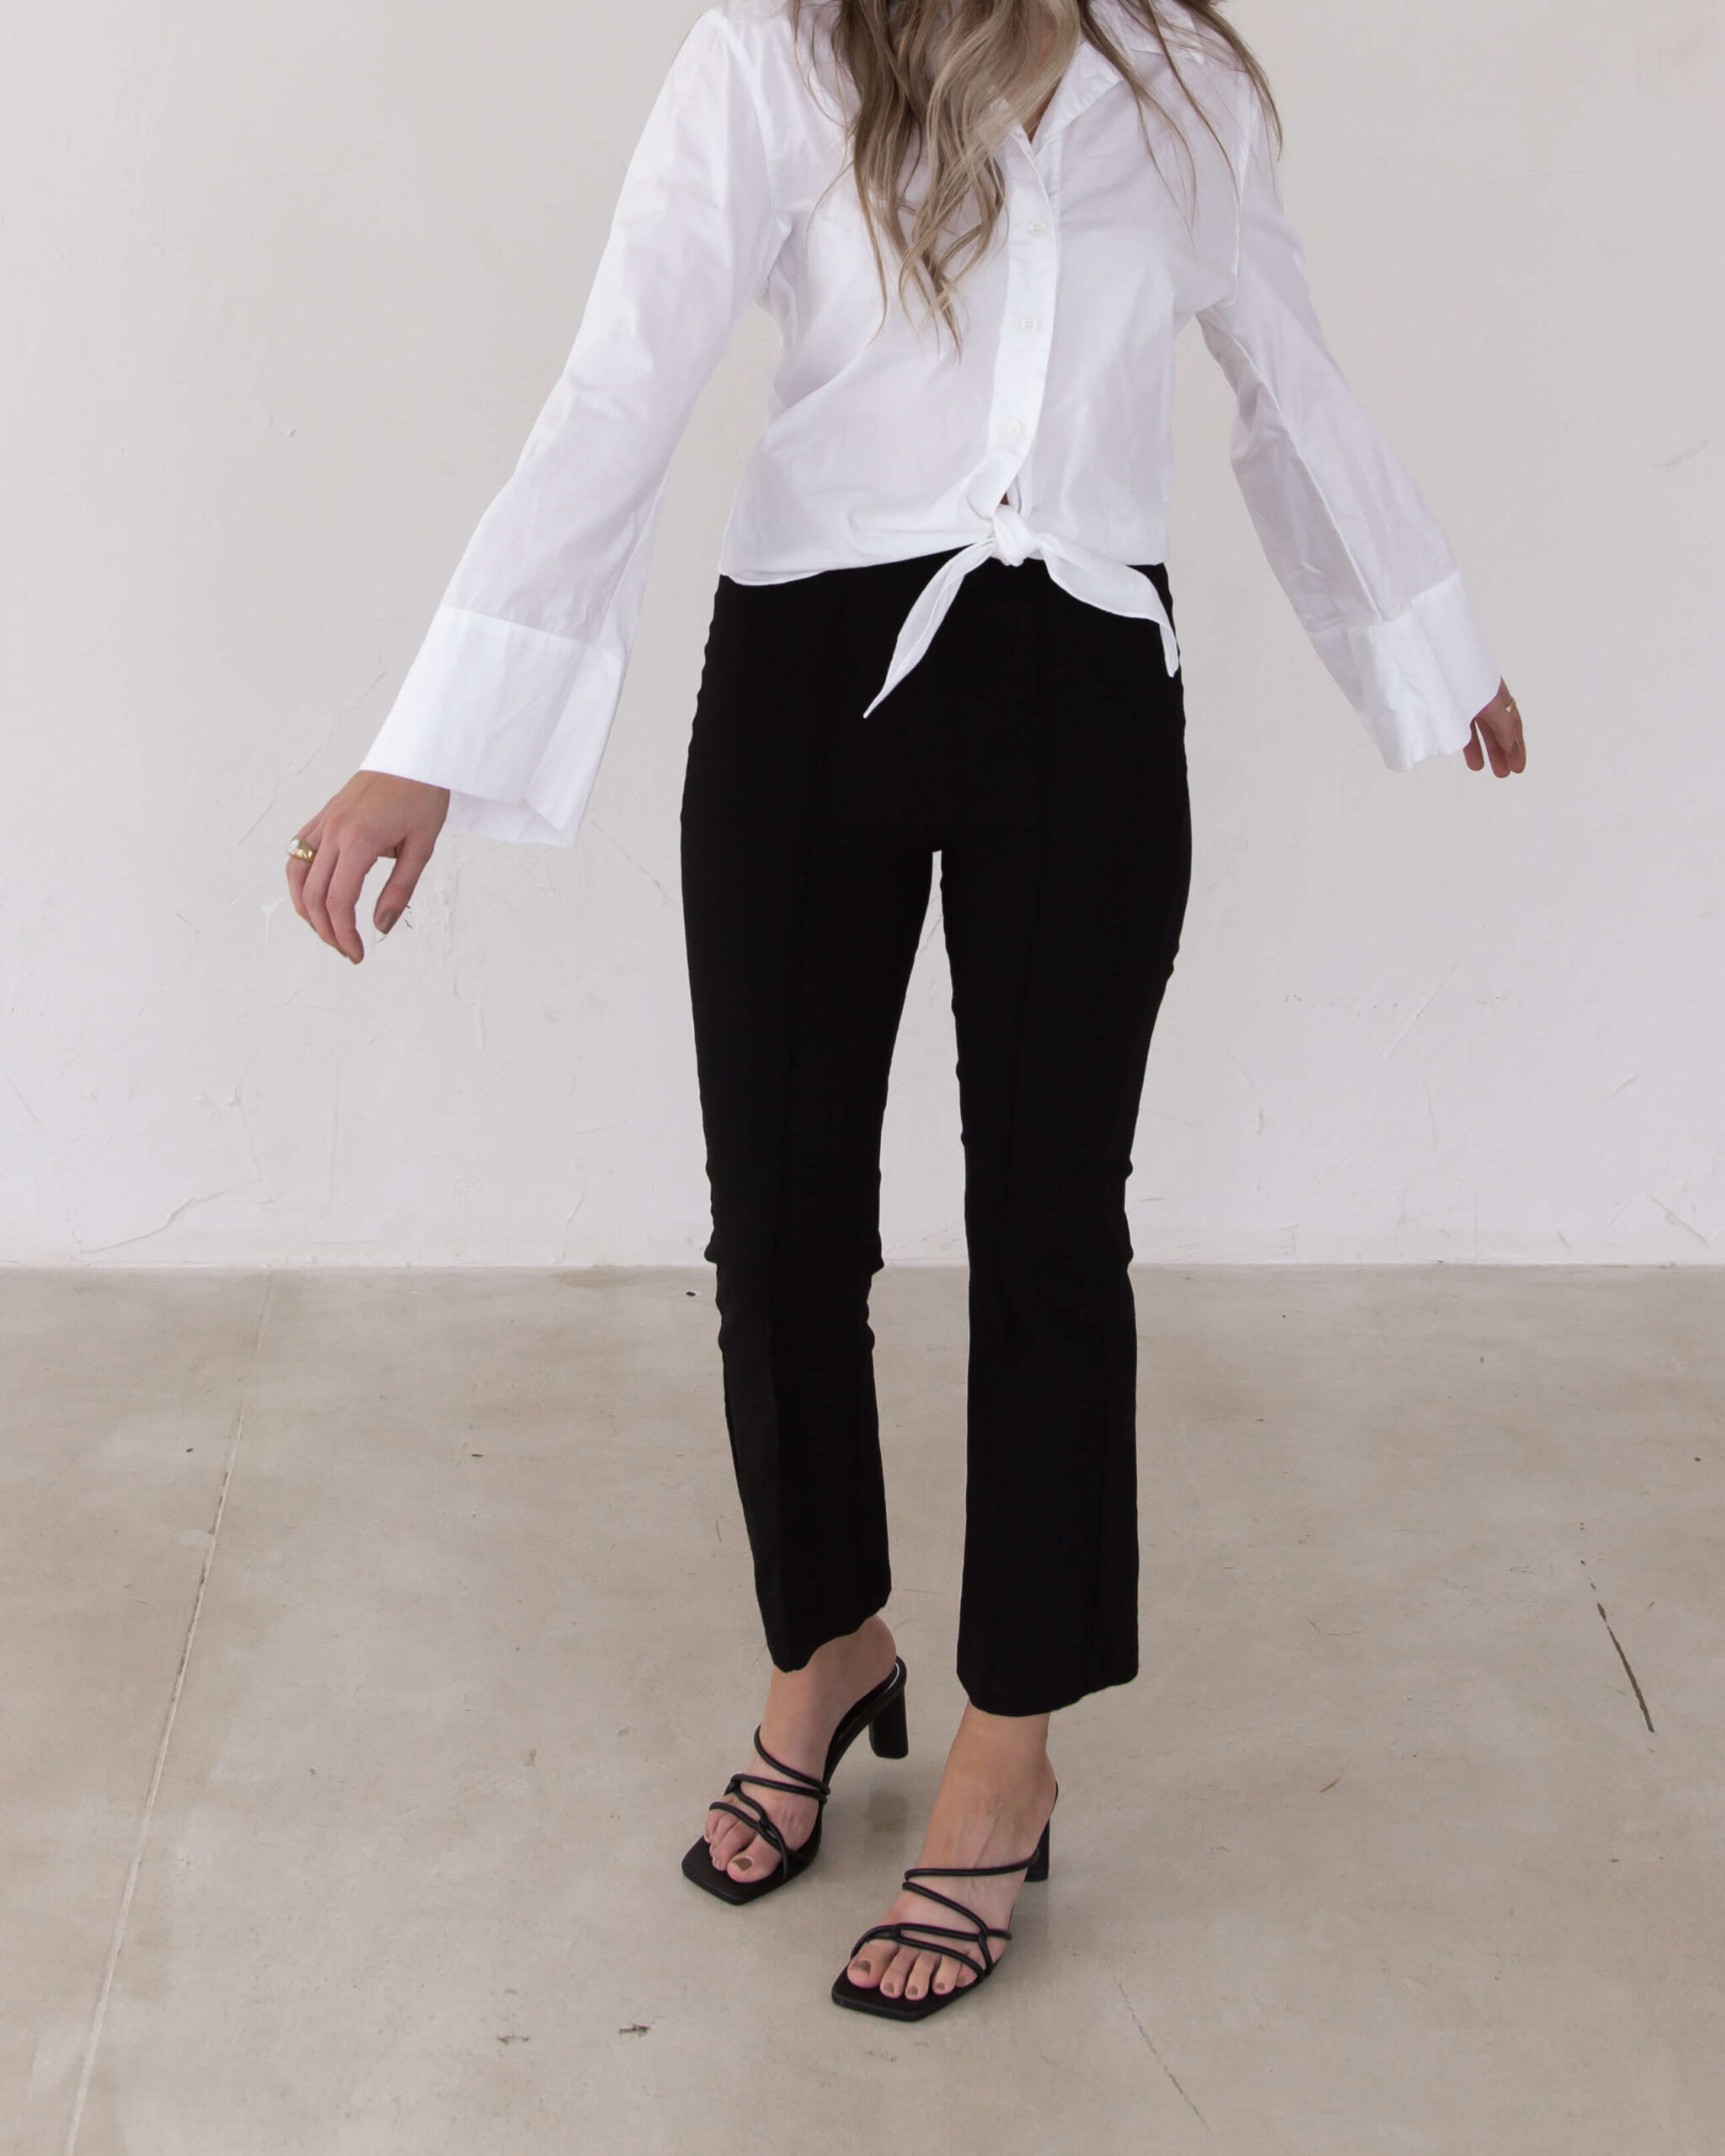 The Perfect White Button Up | Twinspiration